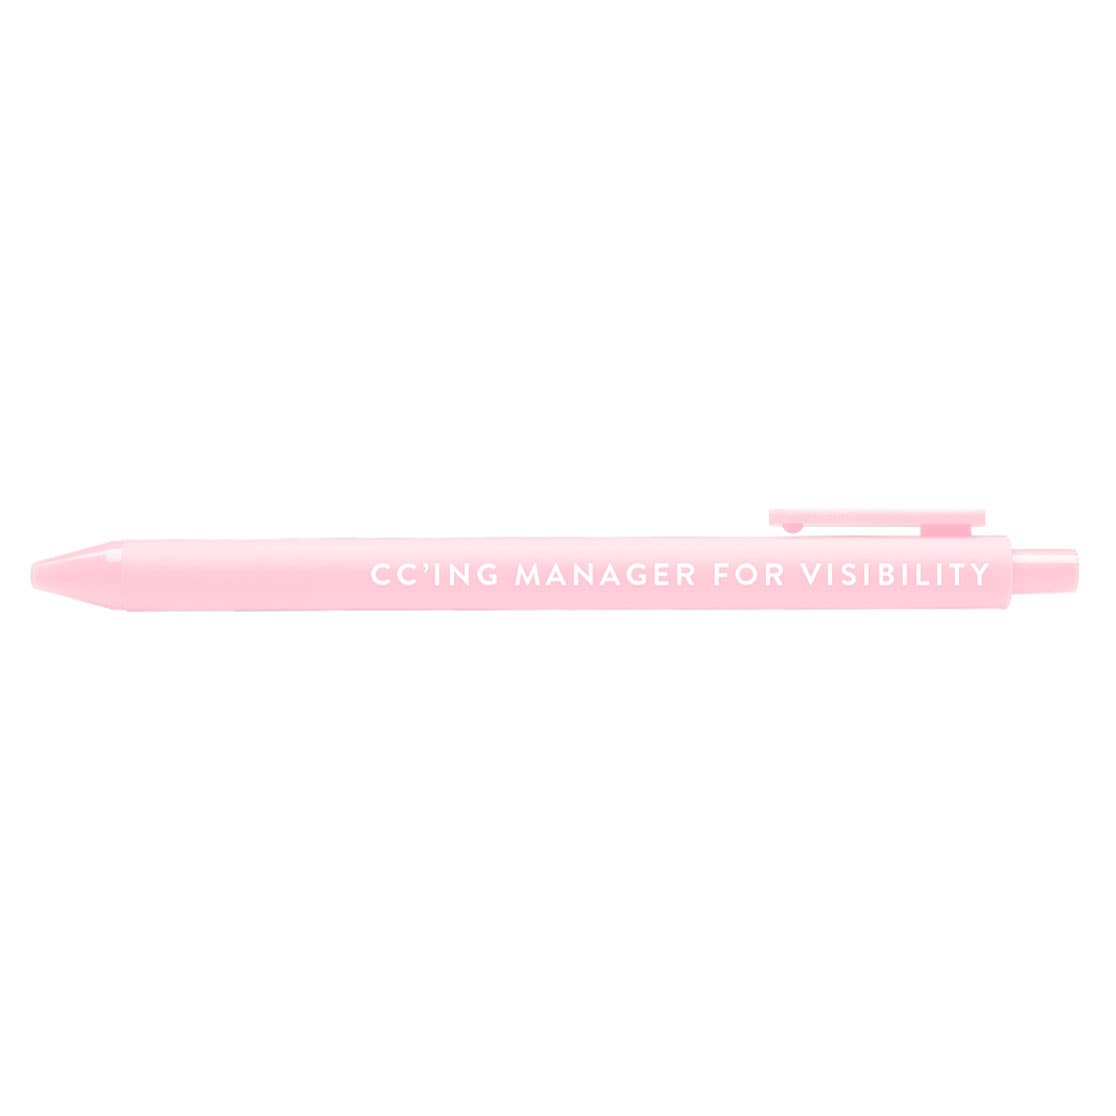 Jotter Pen - Pink CC'ing Manager For Visibility